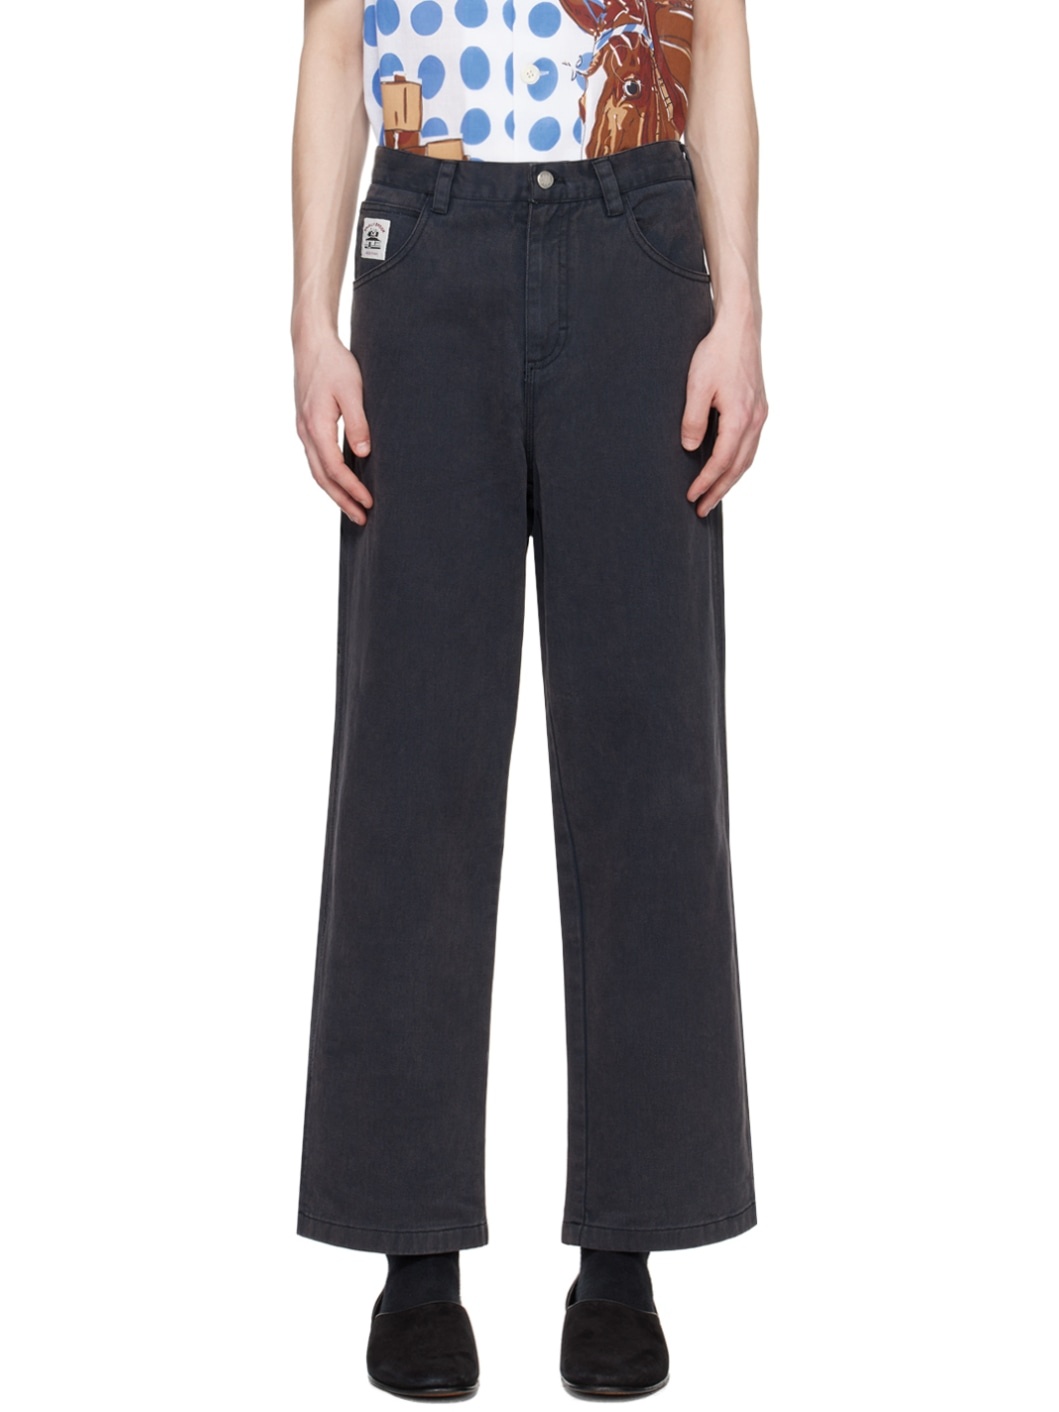 Black Knolly Brook Trousers - 1